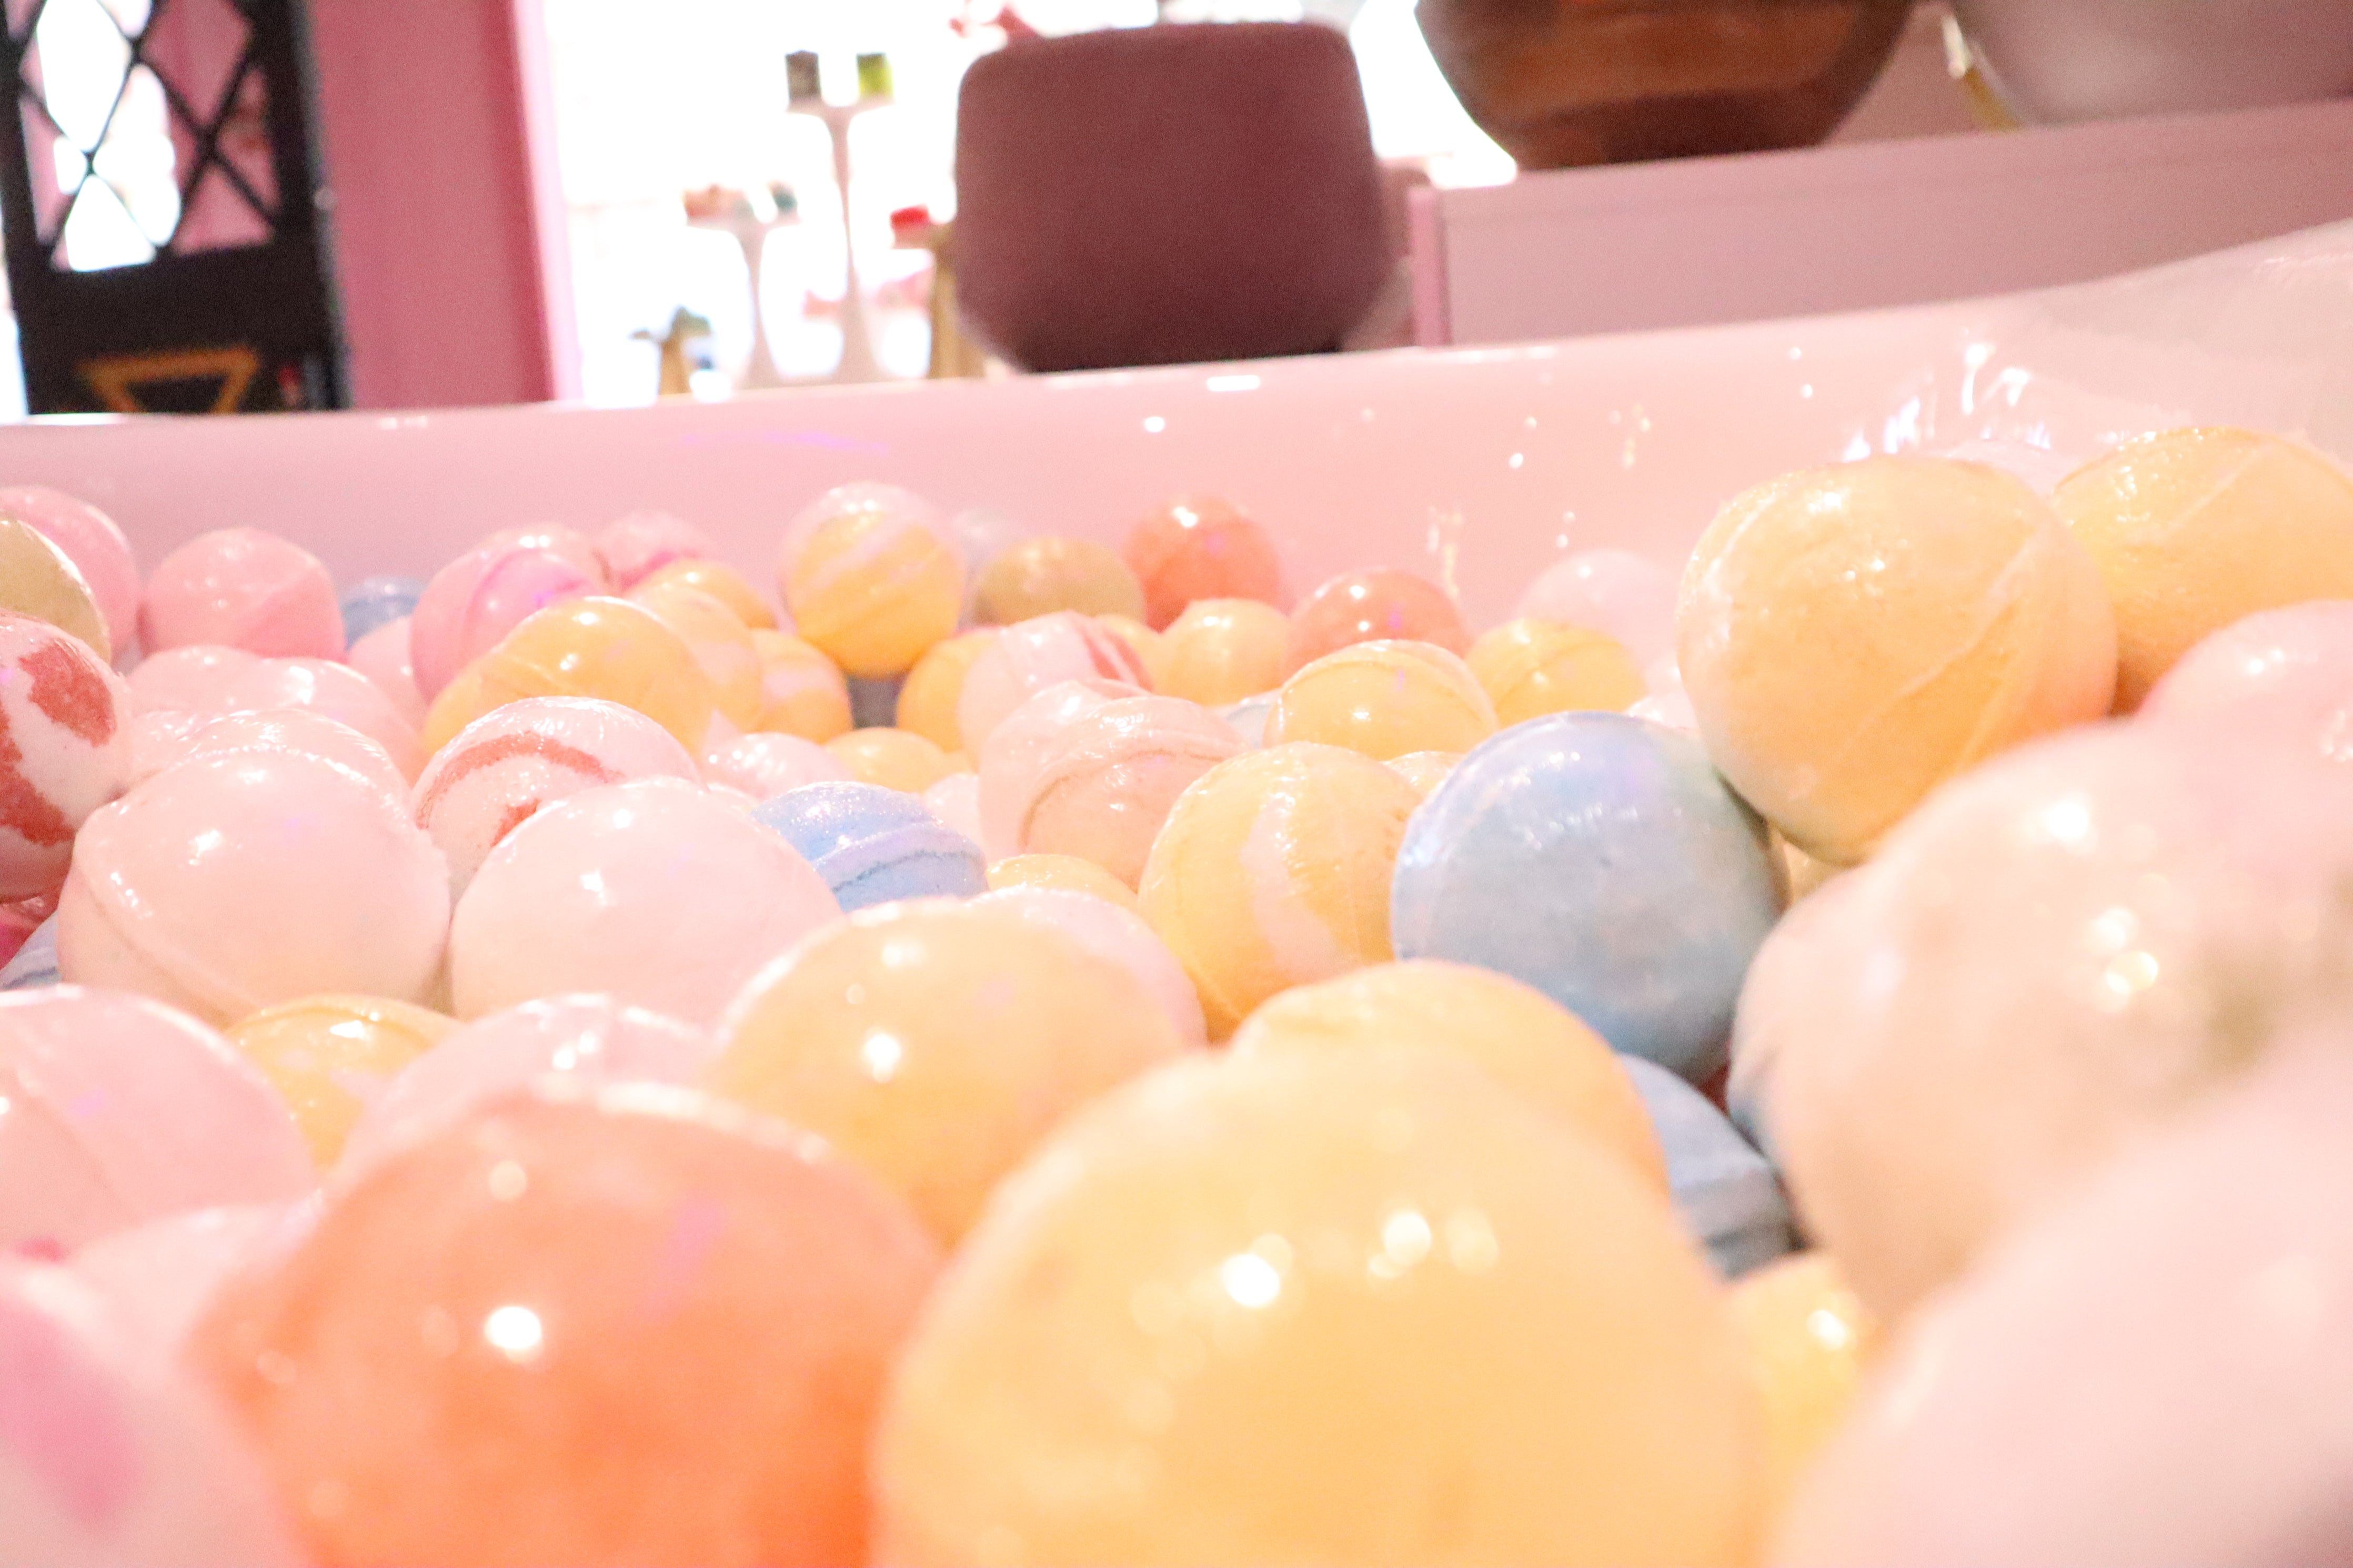 an upclose shot of a light pink bath tub filled with pastel colored Skinderella bath bombs.